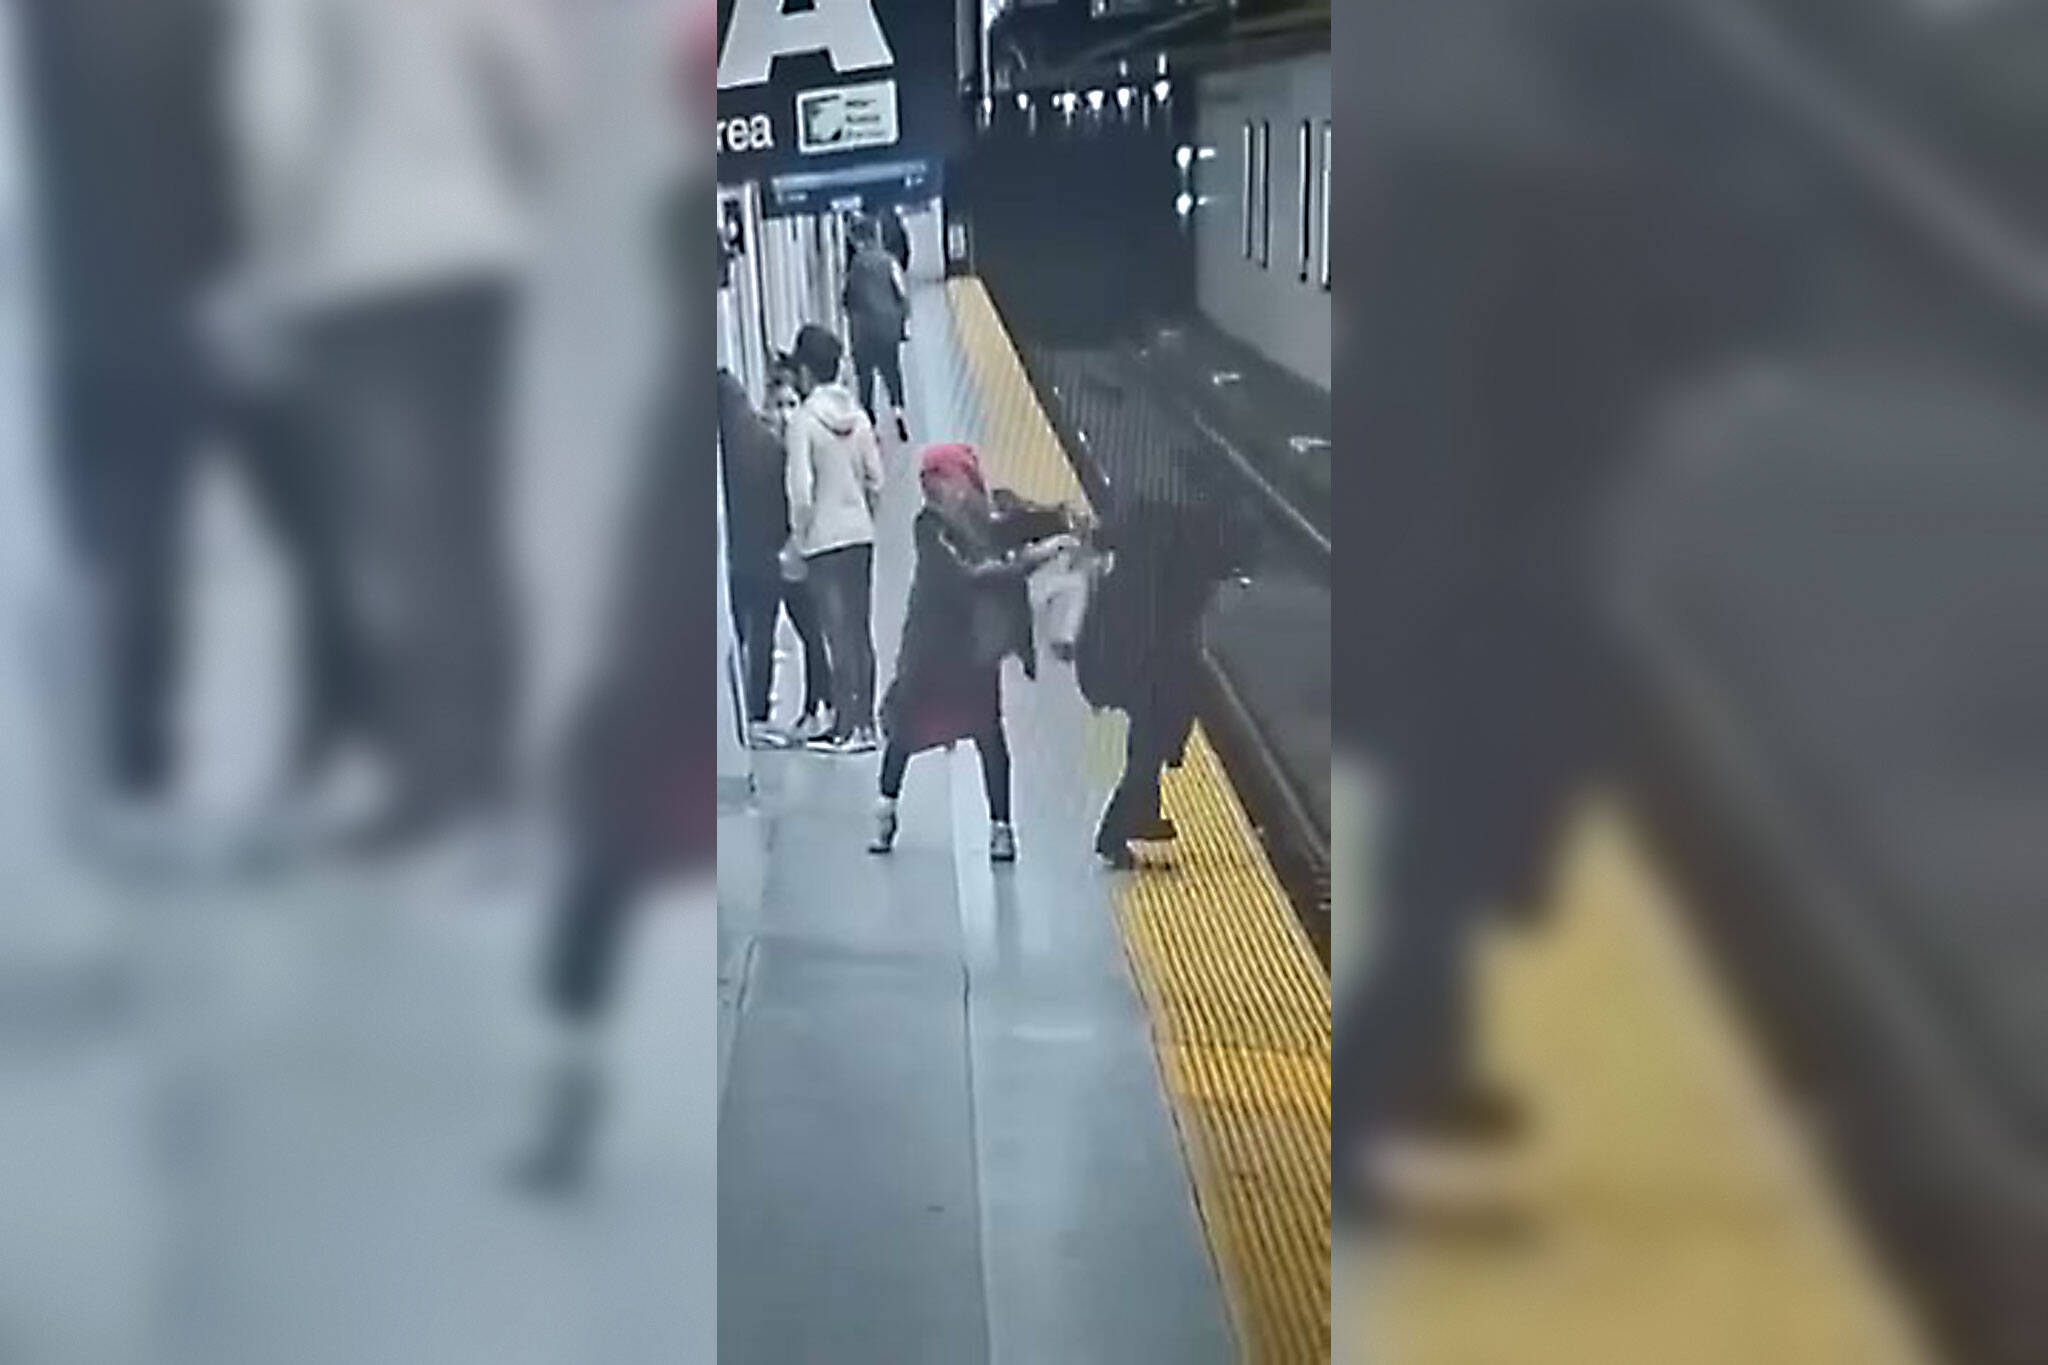 Terrifying Video Shows The Moment A Woman Was Pushed Onto Ttc Subway Tracks